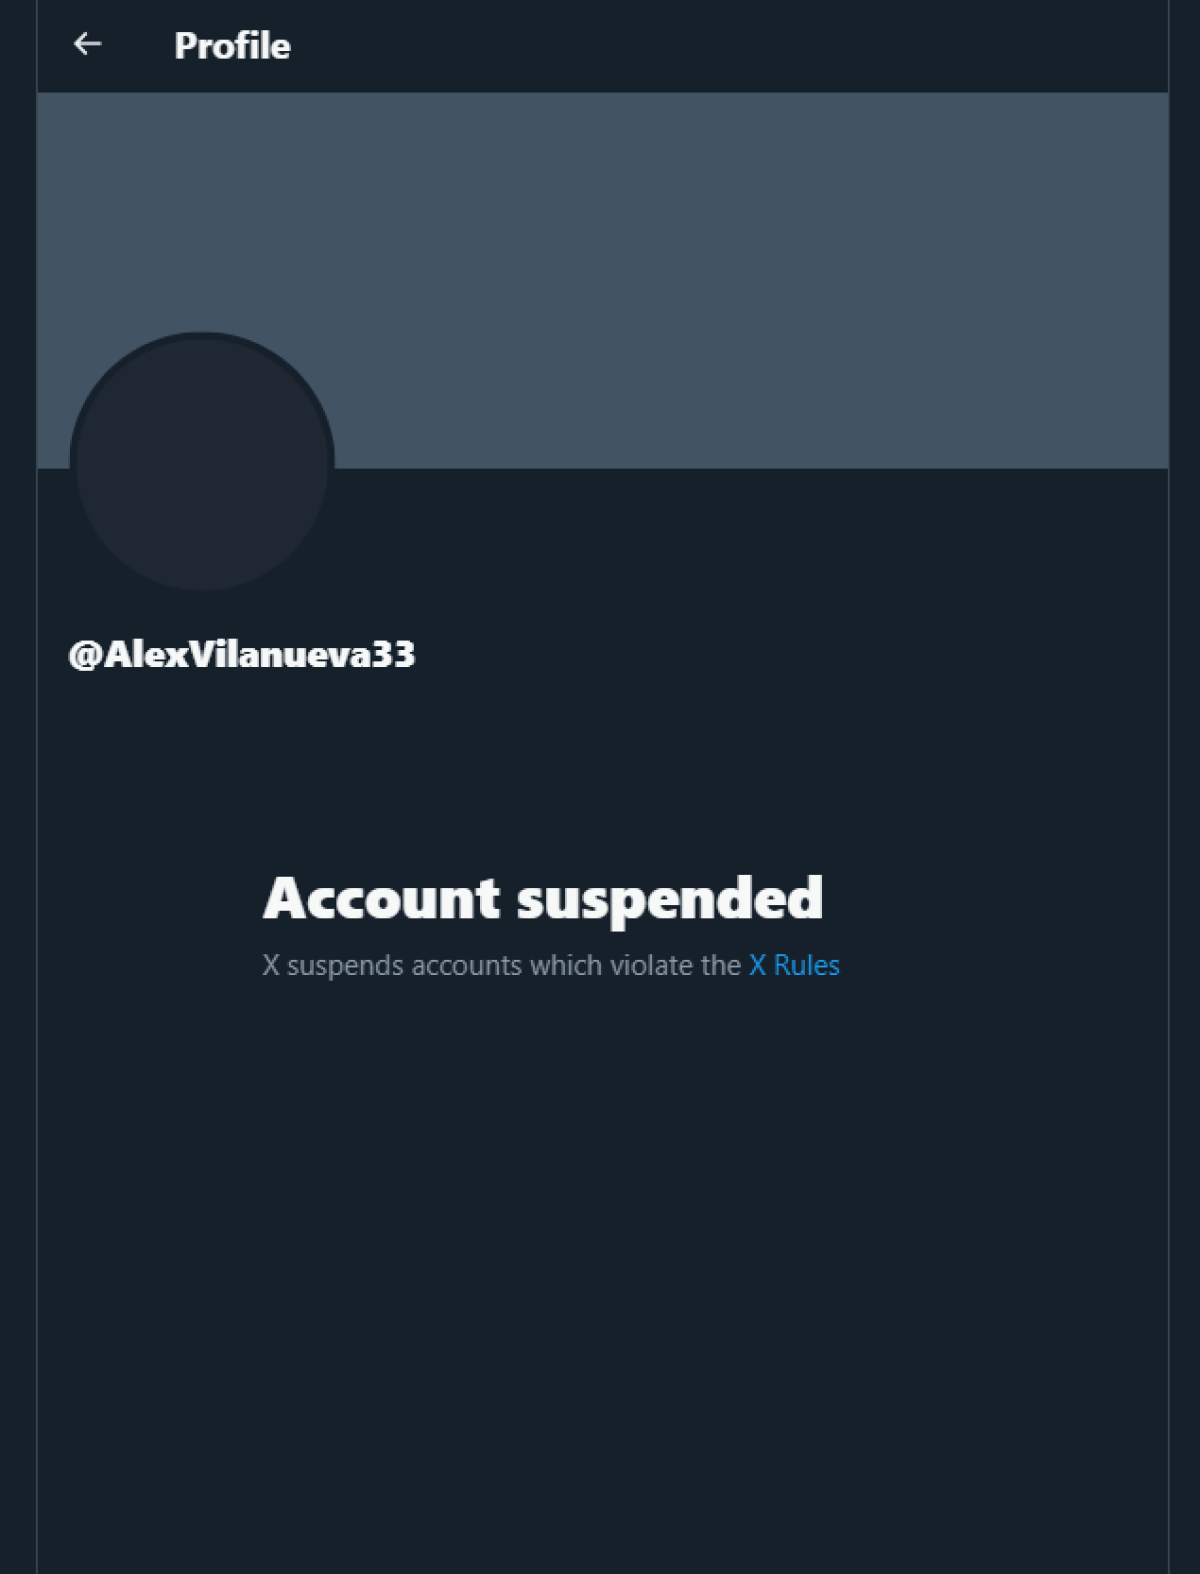 A screenshot reads "Account suspended."